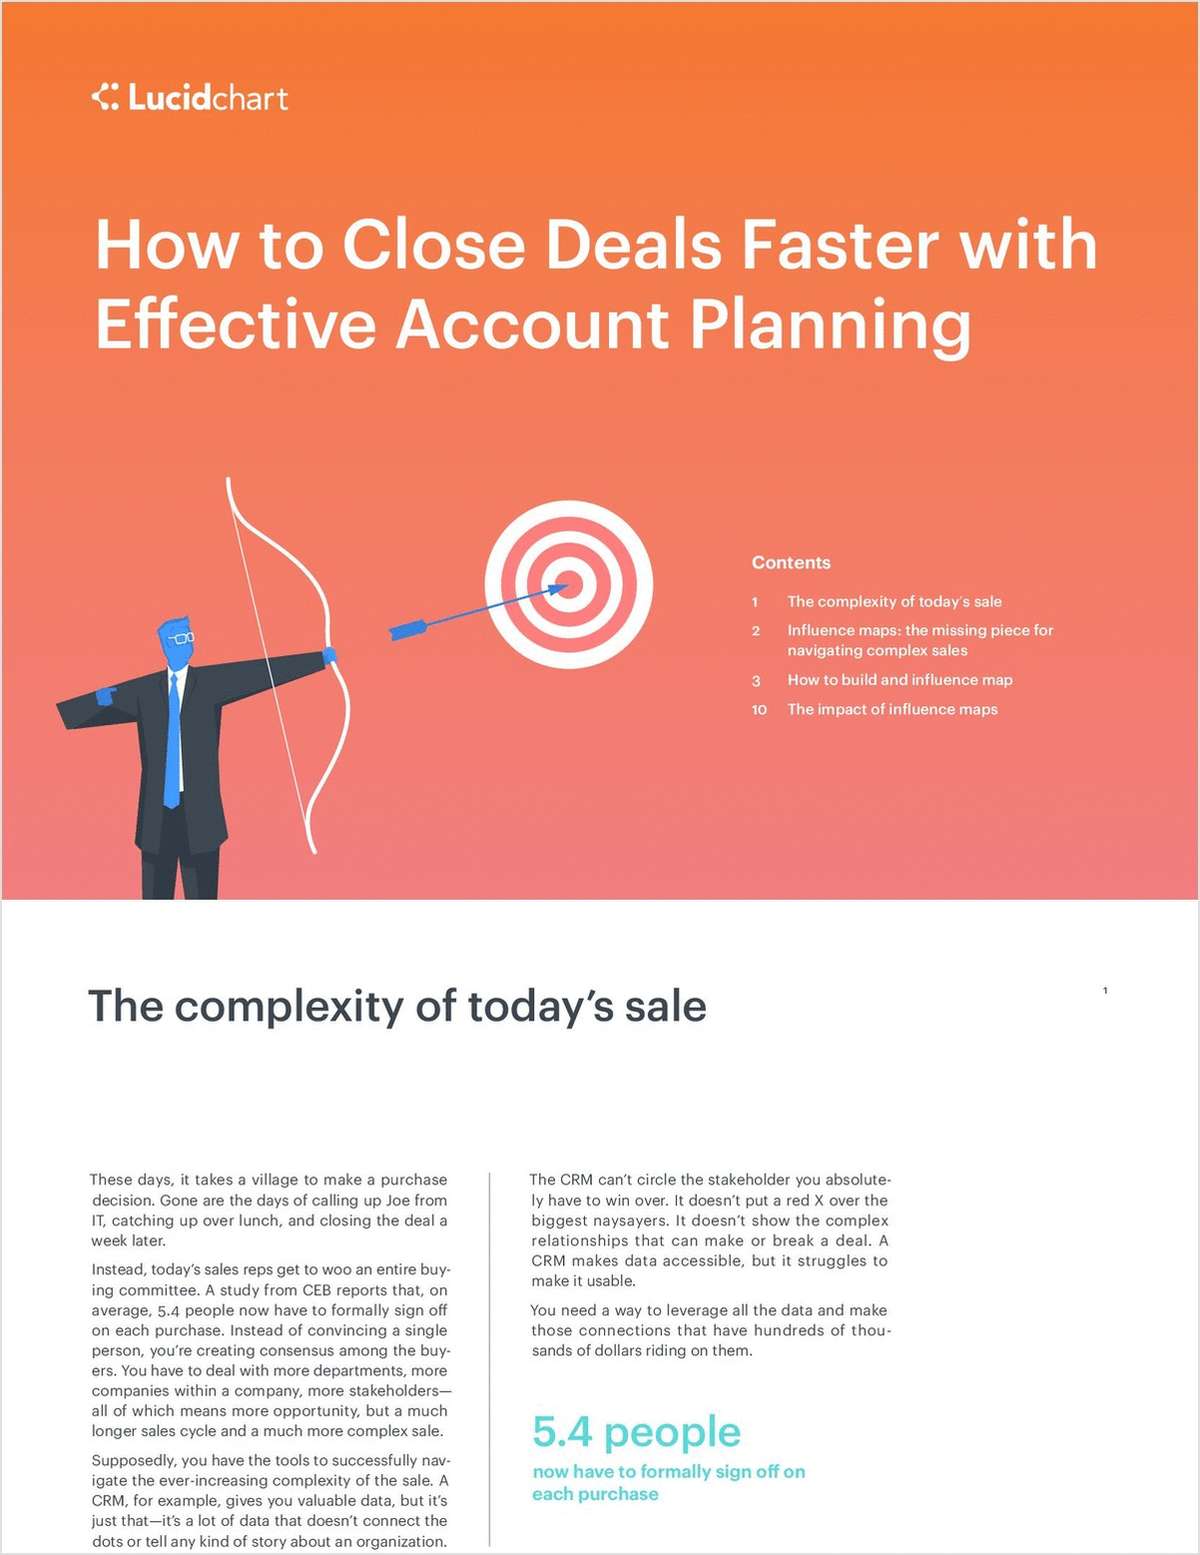 How to Close Deals Faster with Effective Account Planning